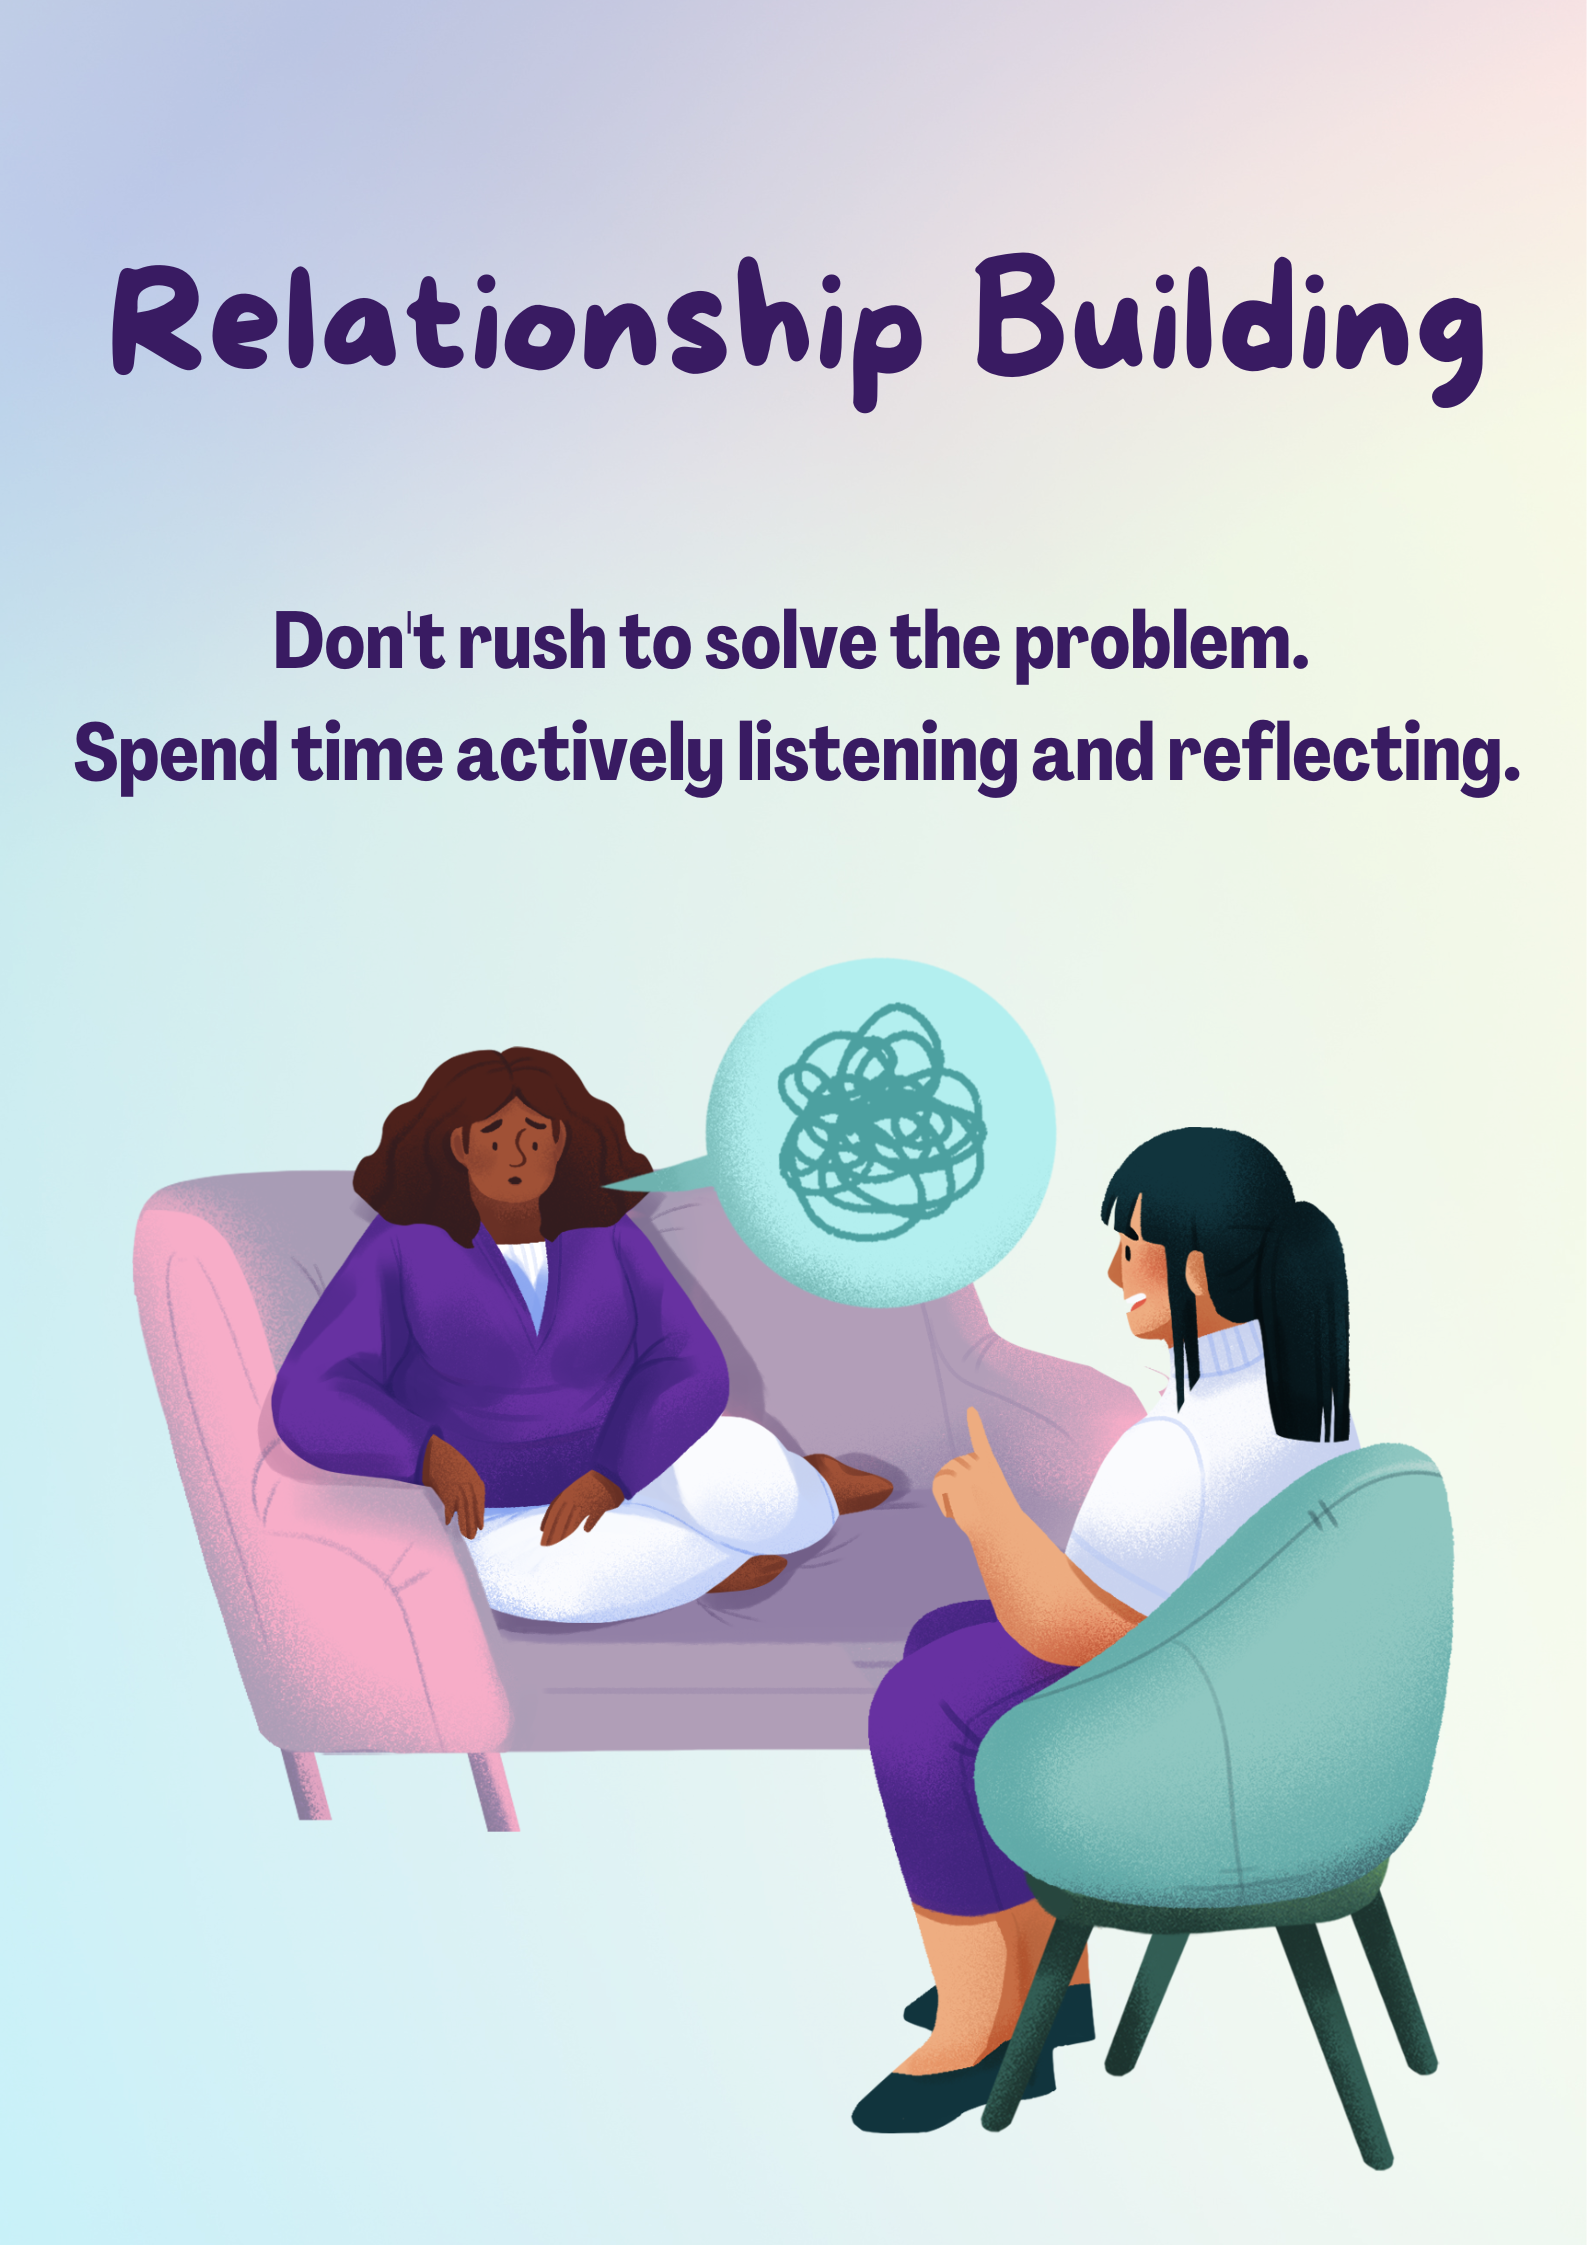 A picture labeled: Relationship Building. The subheading states: "Don't rush to solve the problem. Spend time actively listening and reflecting." There is a cartoon of one person talking while the other person listens.